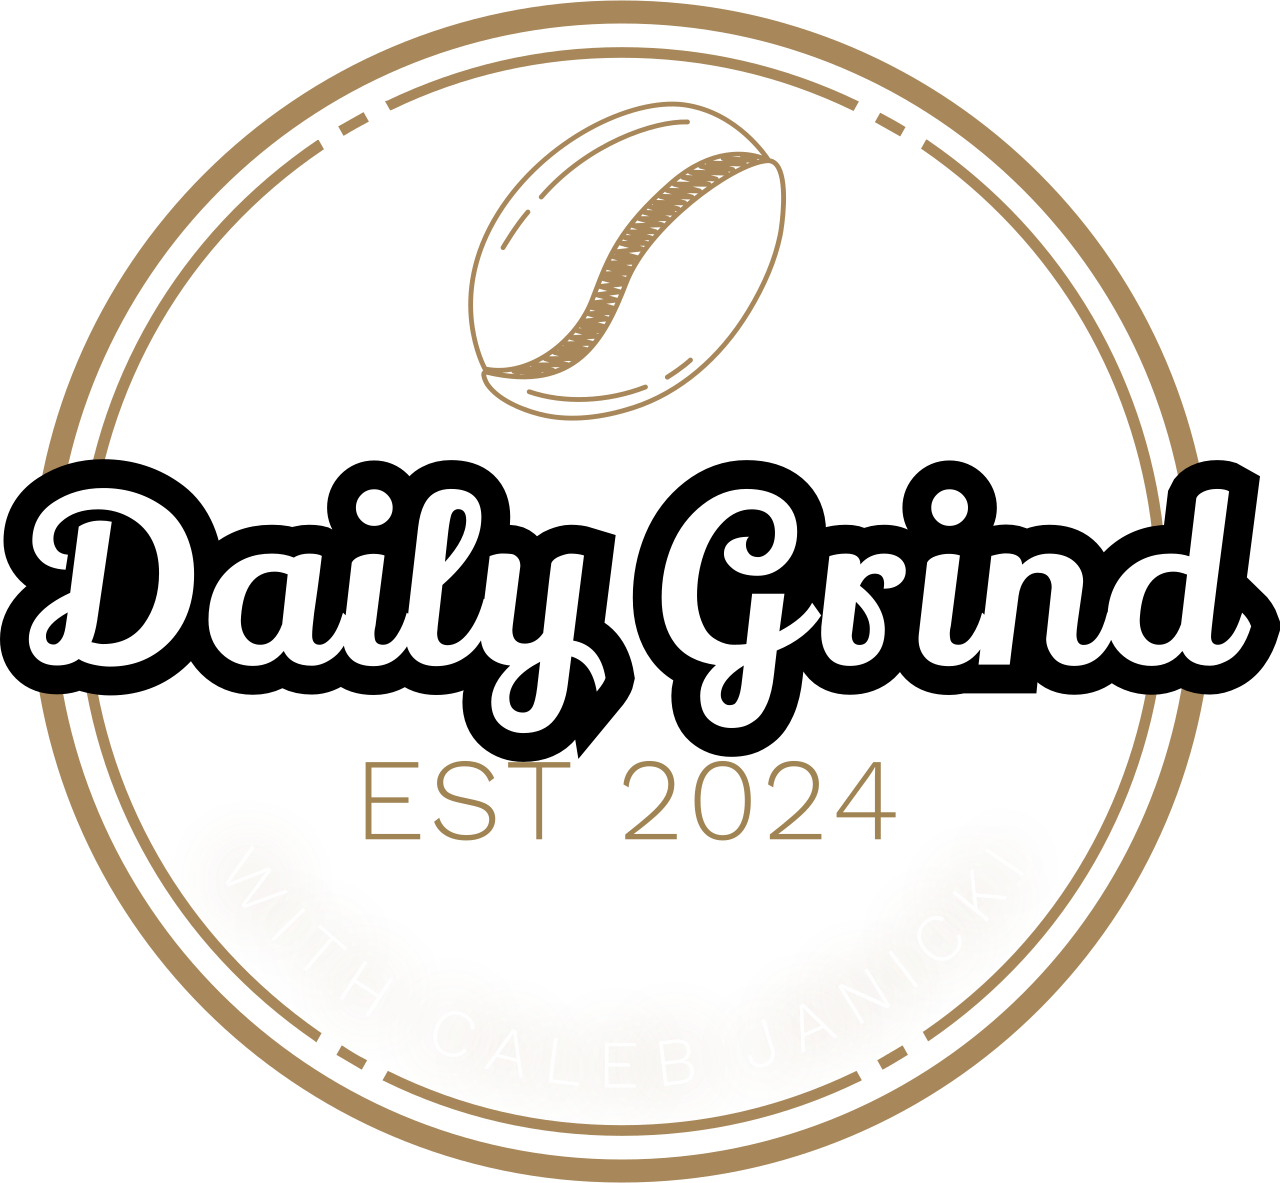 Daily Grind's logo